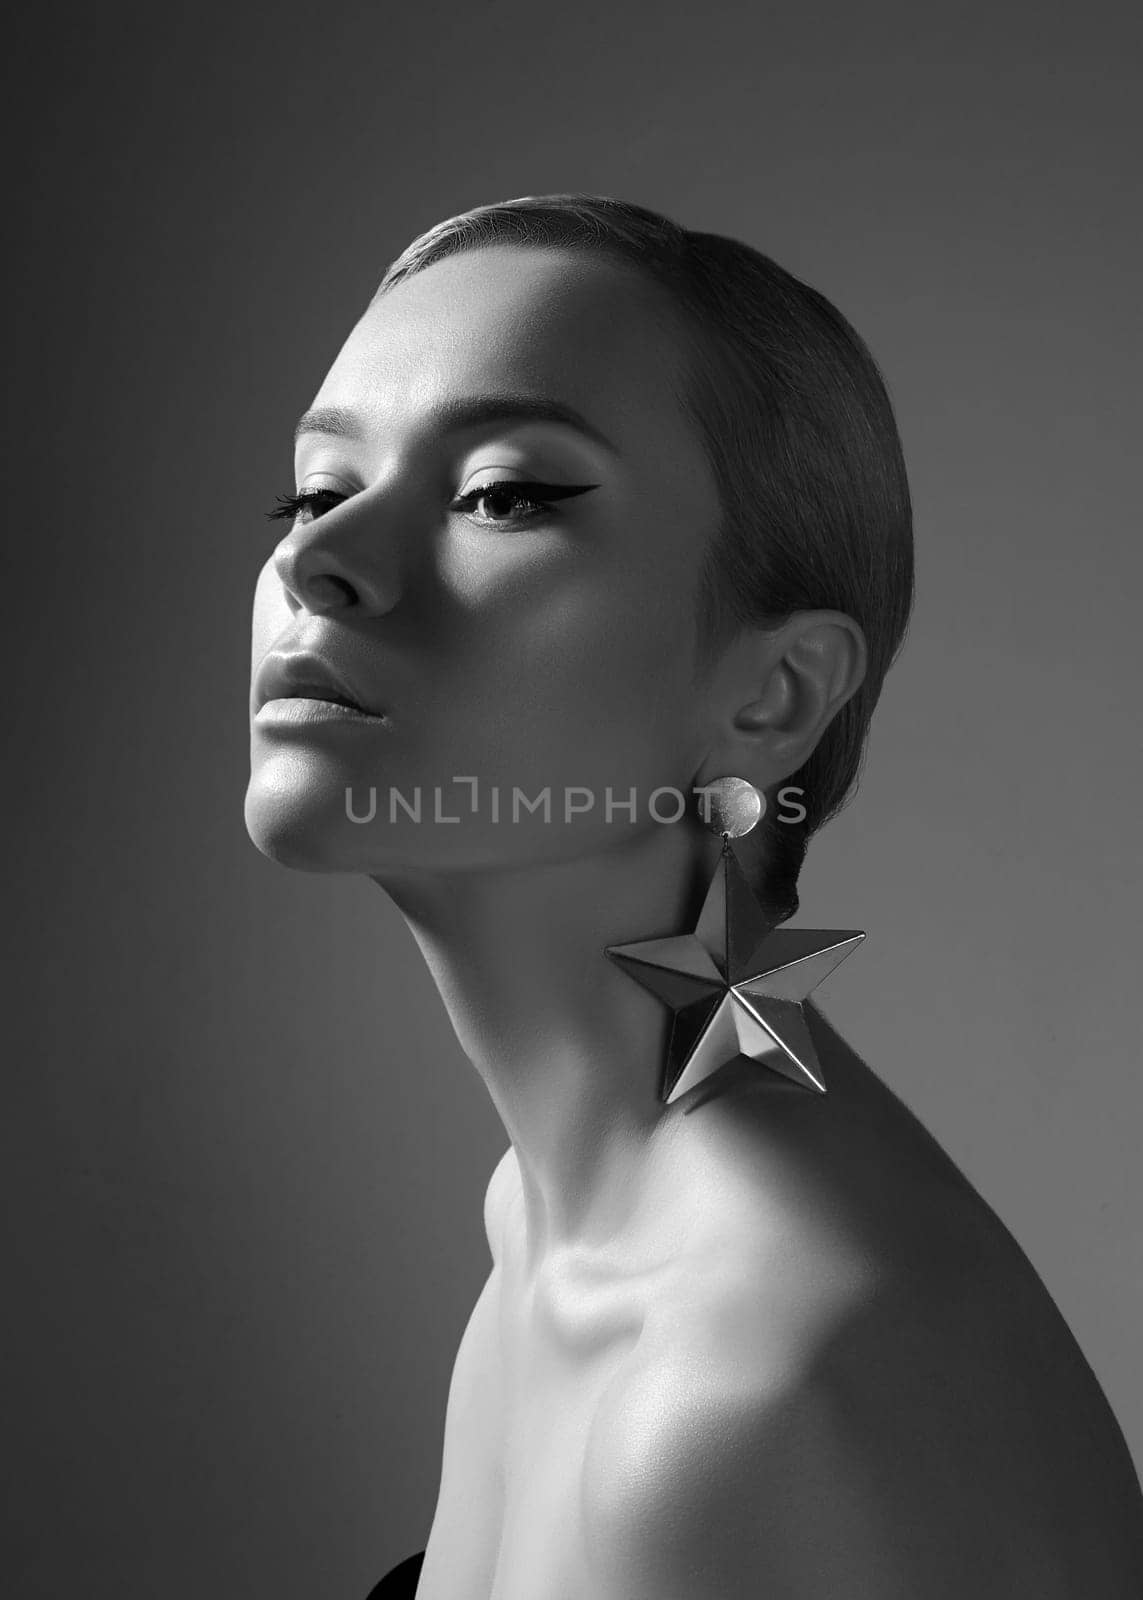 Black and White Portrait with Rembrandt Lighting. Beautiful Woman in Retro Style with Slicked Hair. Elegant Cinema Look by MarinaFrost